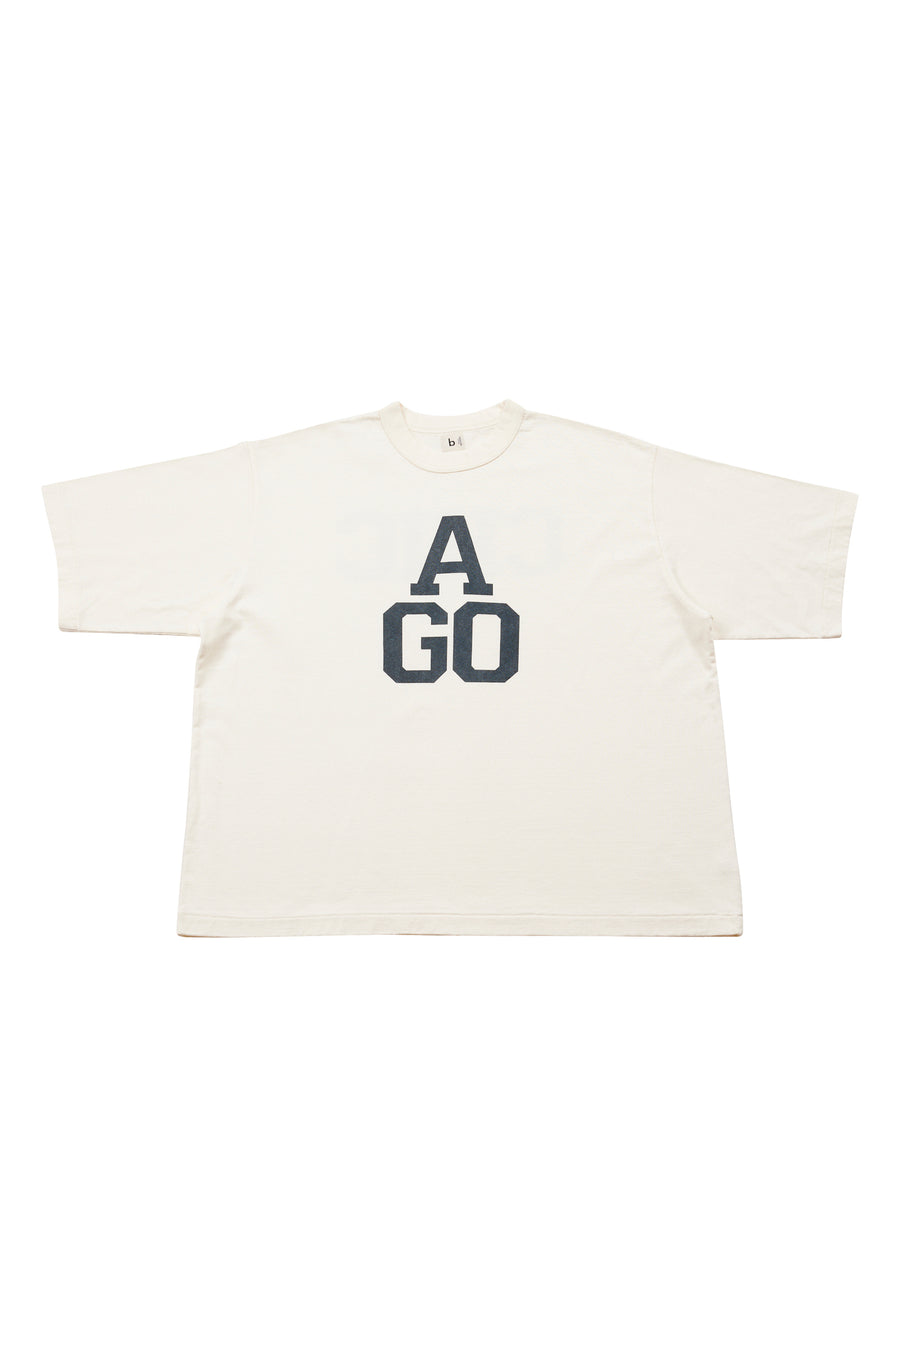 CHIC-AGO 88/12 Print Tee WIDE